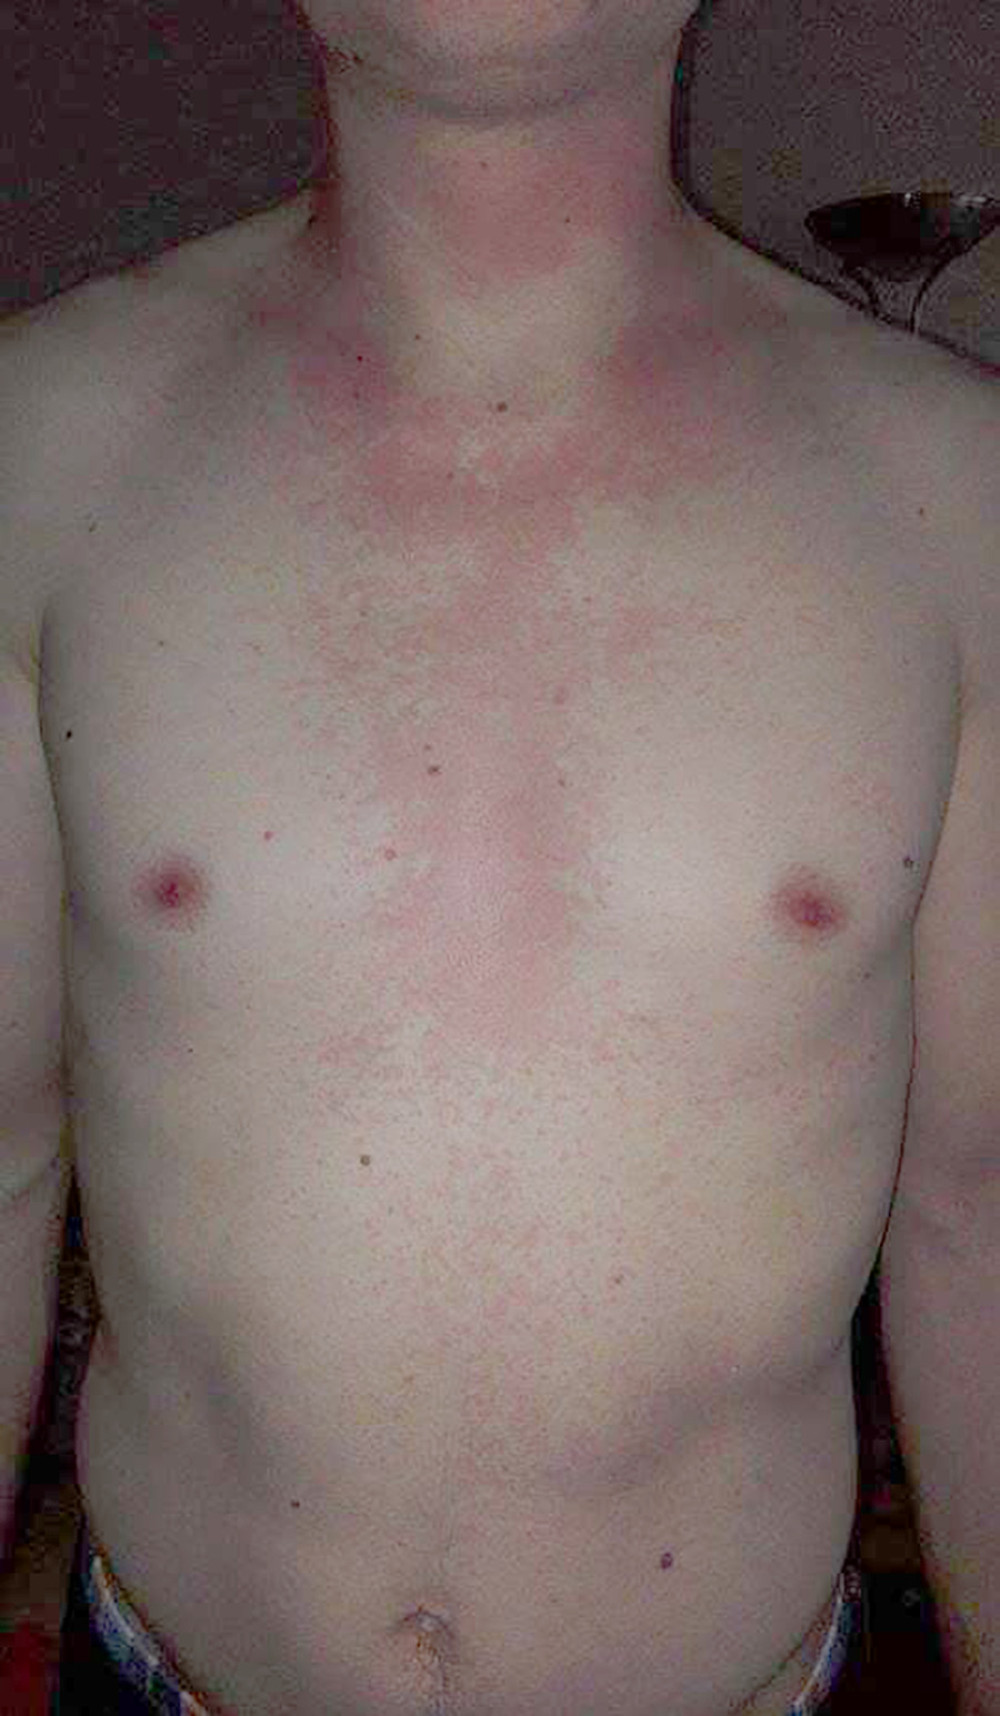 34-year-old man with adverse reaction to histamine in food and beverages. The first brother of the patient also had an adverse reaction to histamine in food and beverages, with all the accompanying symptoms.